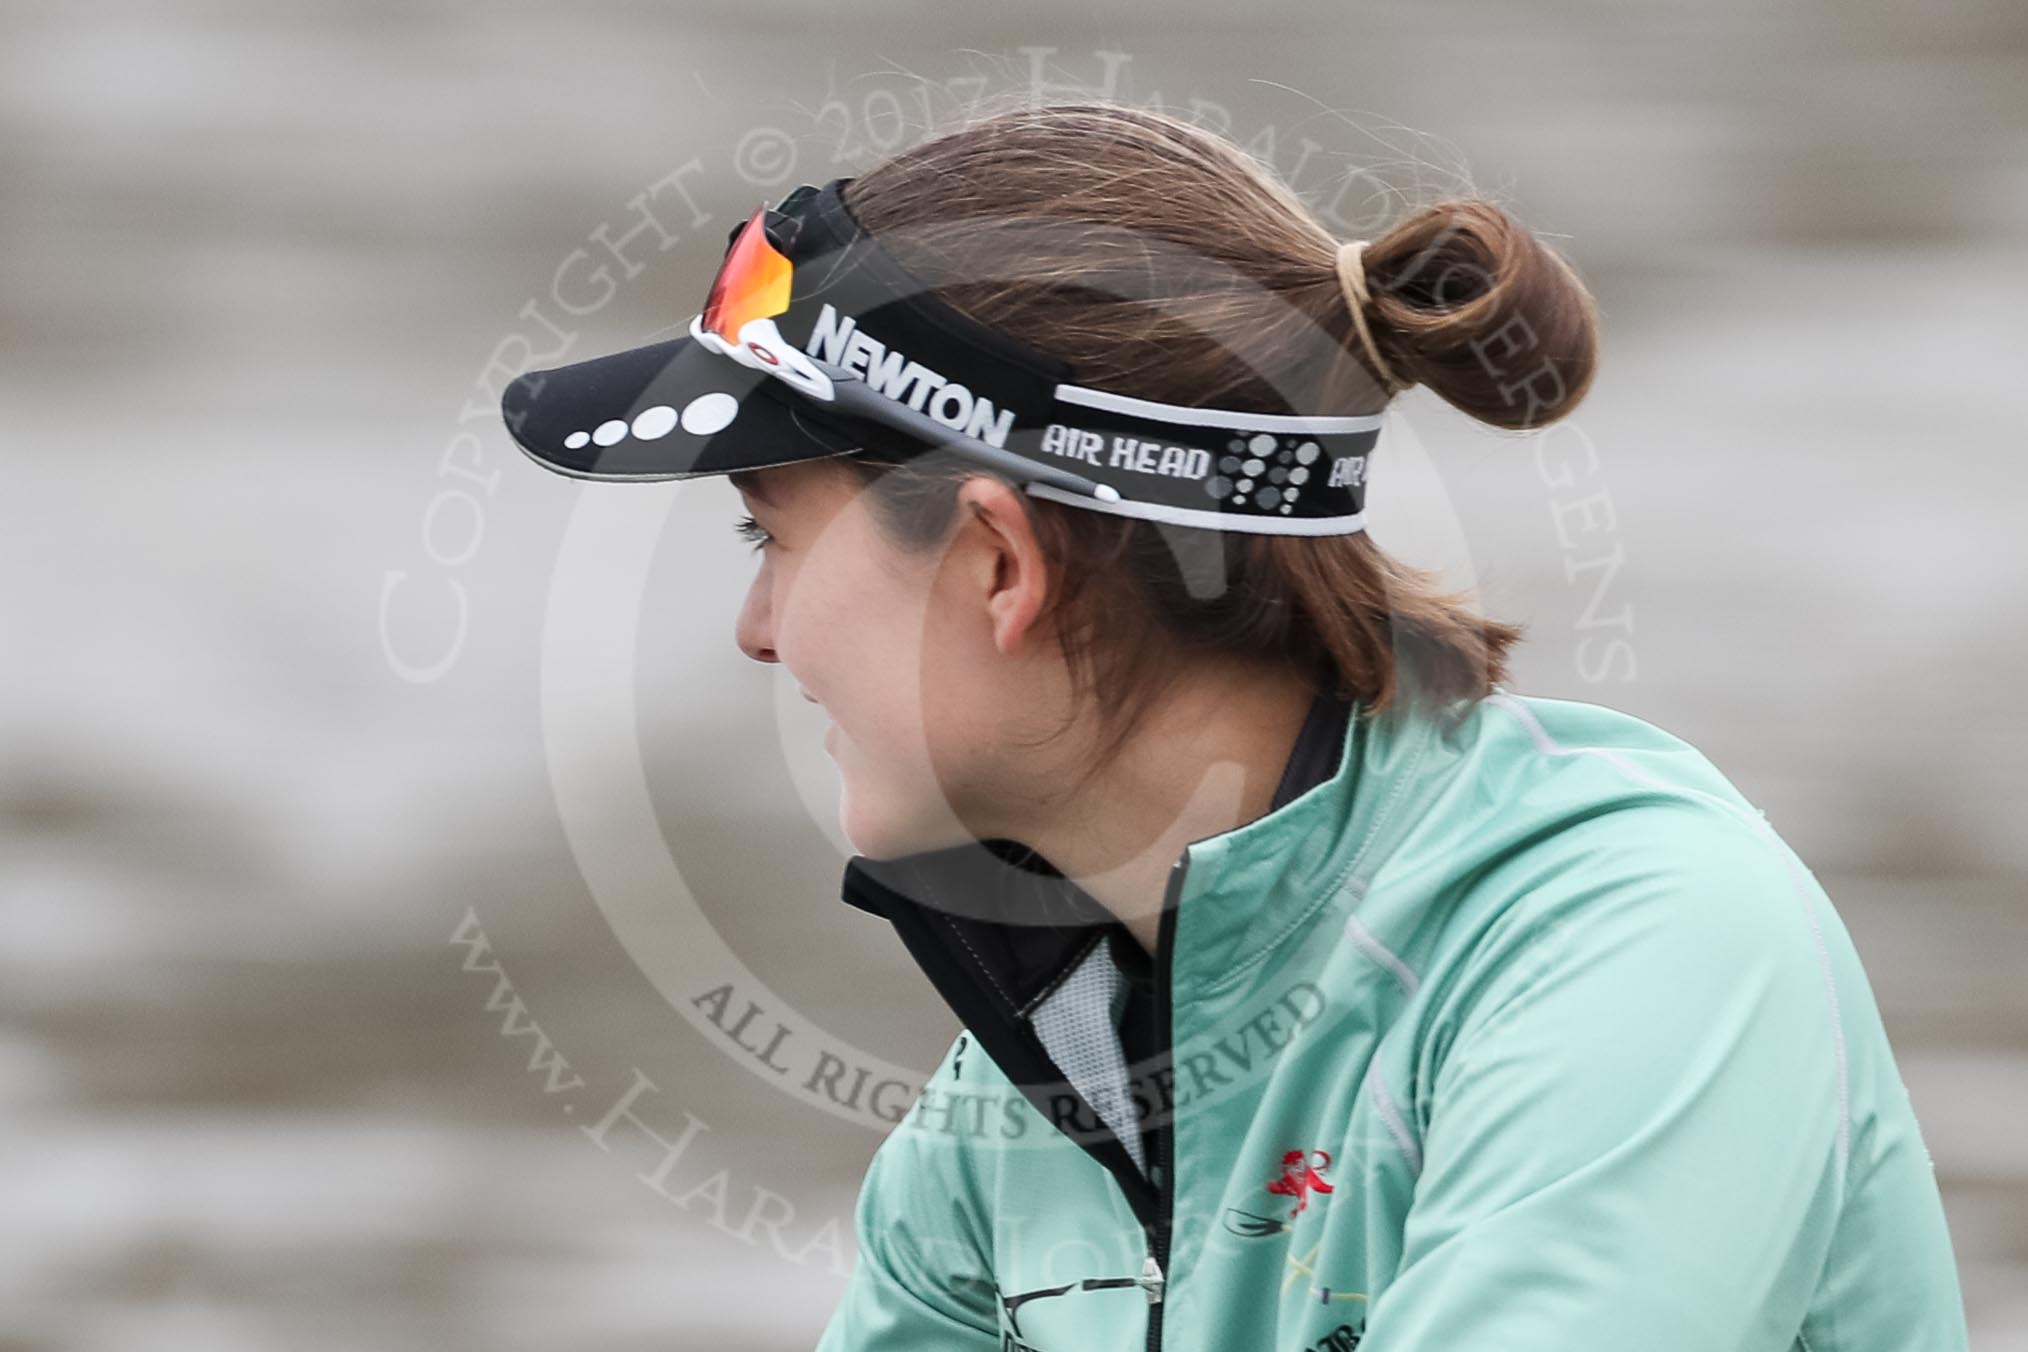 The Boat Race season 2018 - Women's Boat Race Trial Eights (CUWBC, Cambridge): Tricia Smith (5) in Wingardium Leviosa.
River Thames between Putney Bridge and Mortlake,
London SW15,

United Kingdom,
on 05 December 2017 at 12:03, image #18